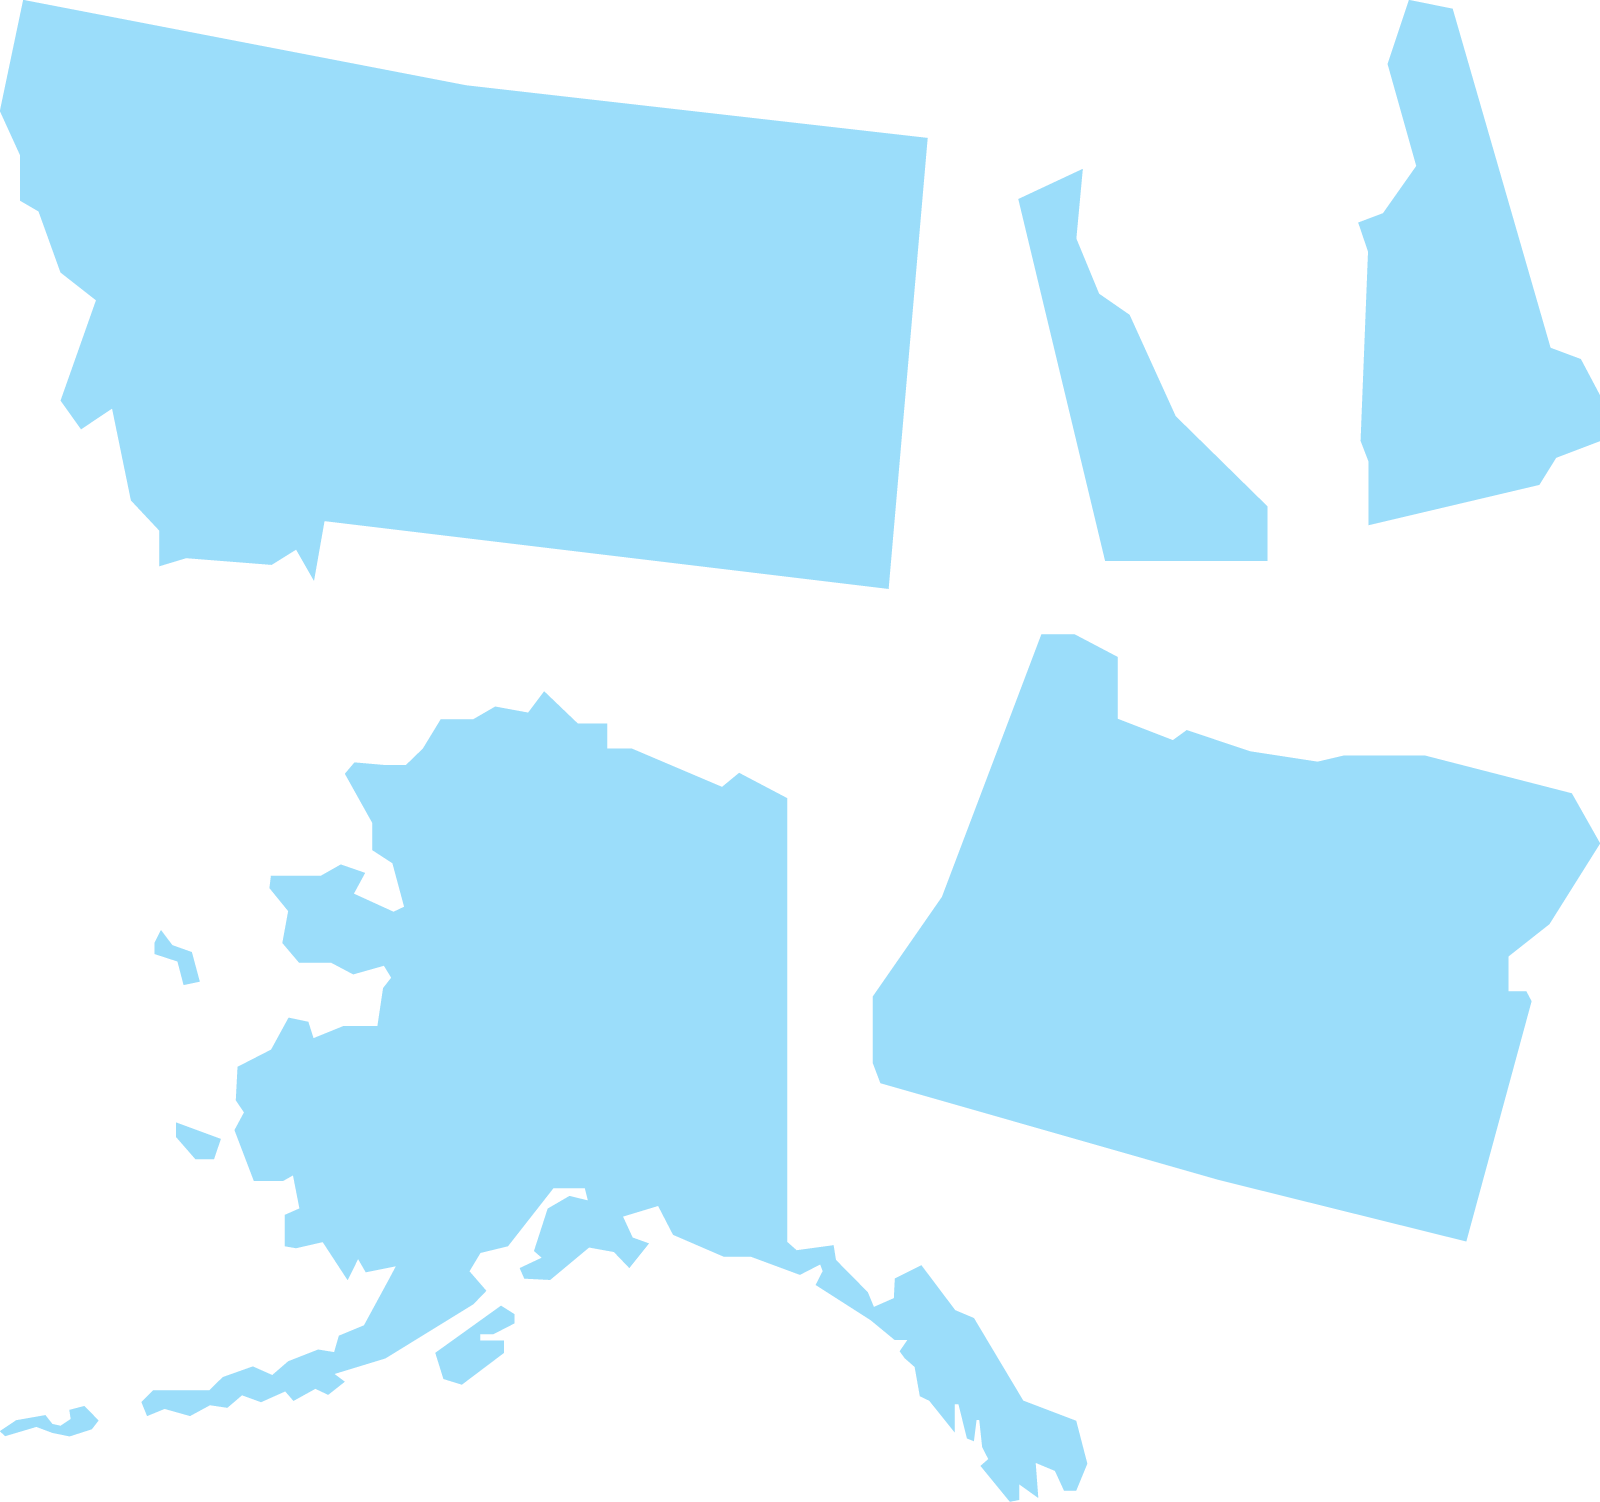 Outlines of New Hampshire, Oregon, Montana, Alaska, and Delaware in light blue.